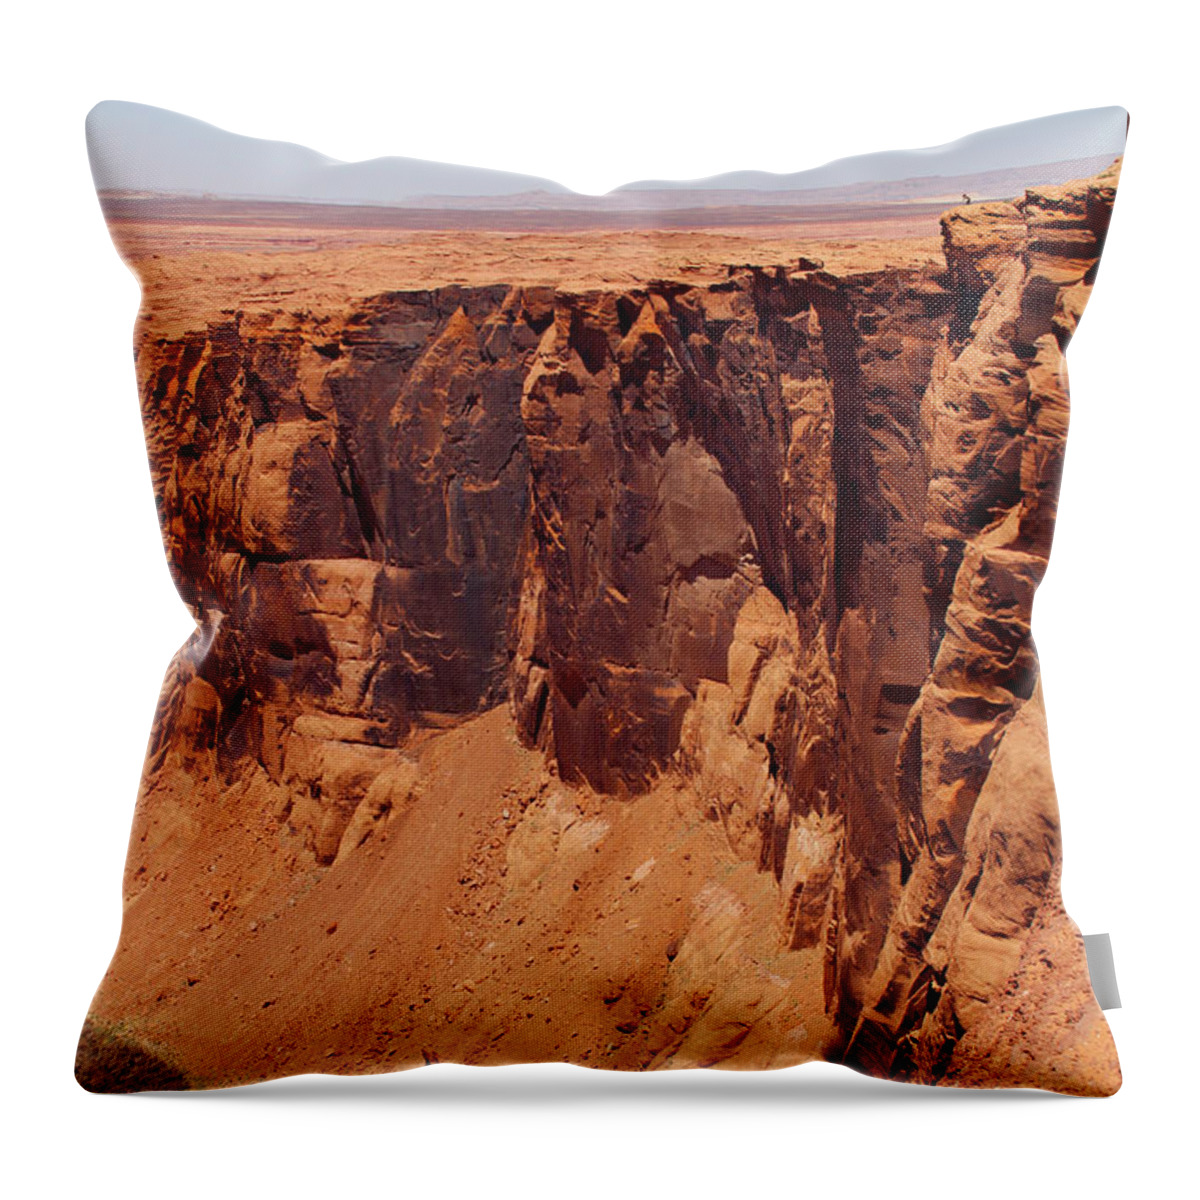 The Photographer Throw Pillow featuring the photograph The Photographer 2 by Mike McGlothlen